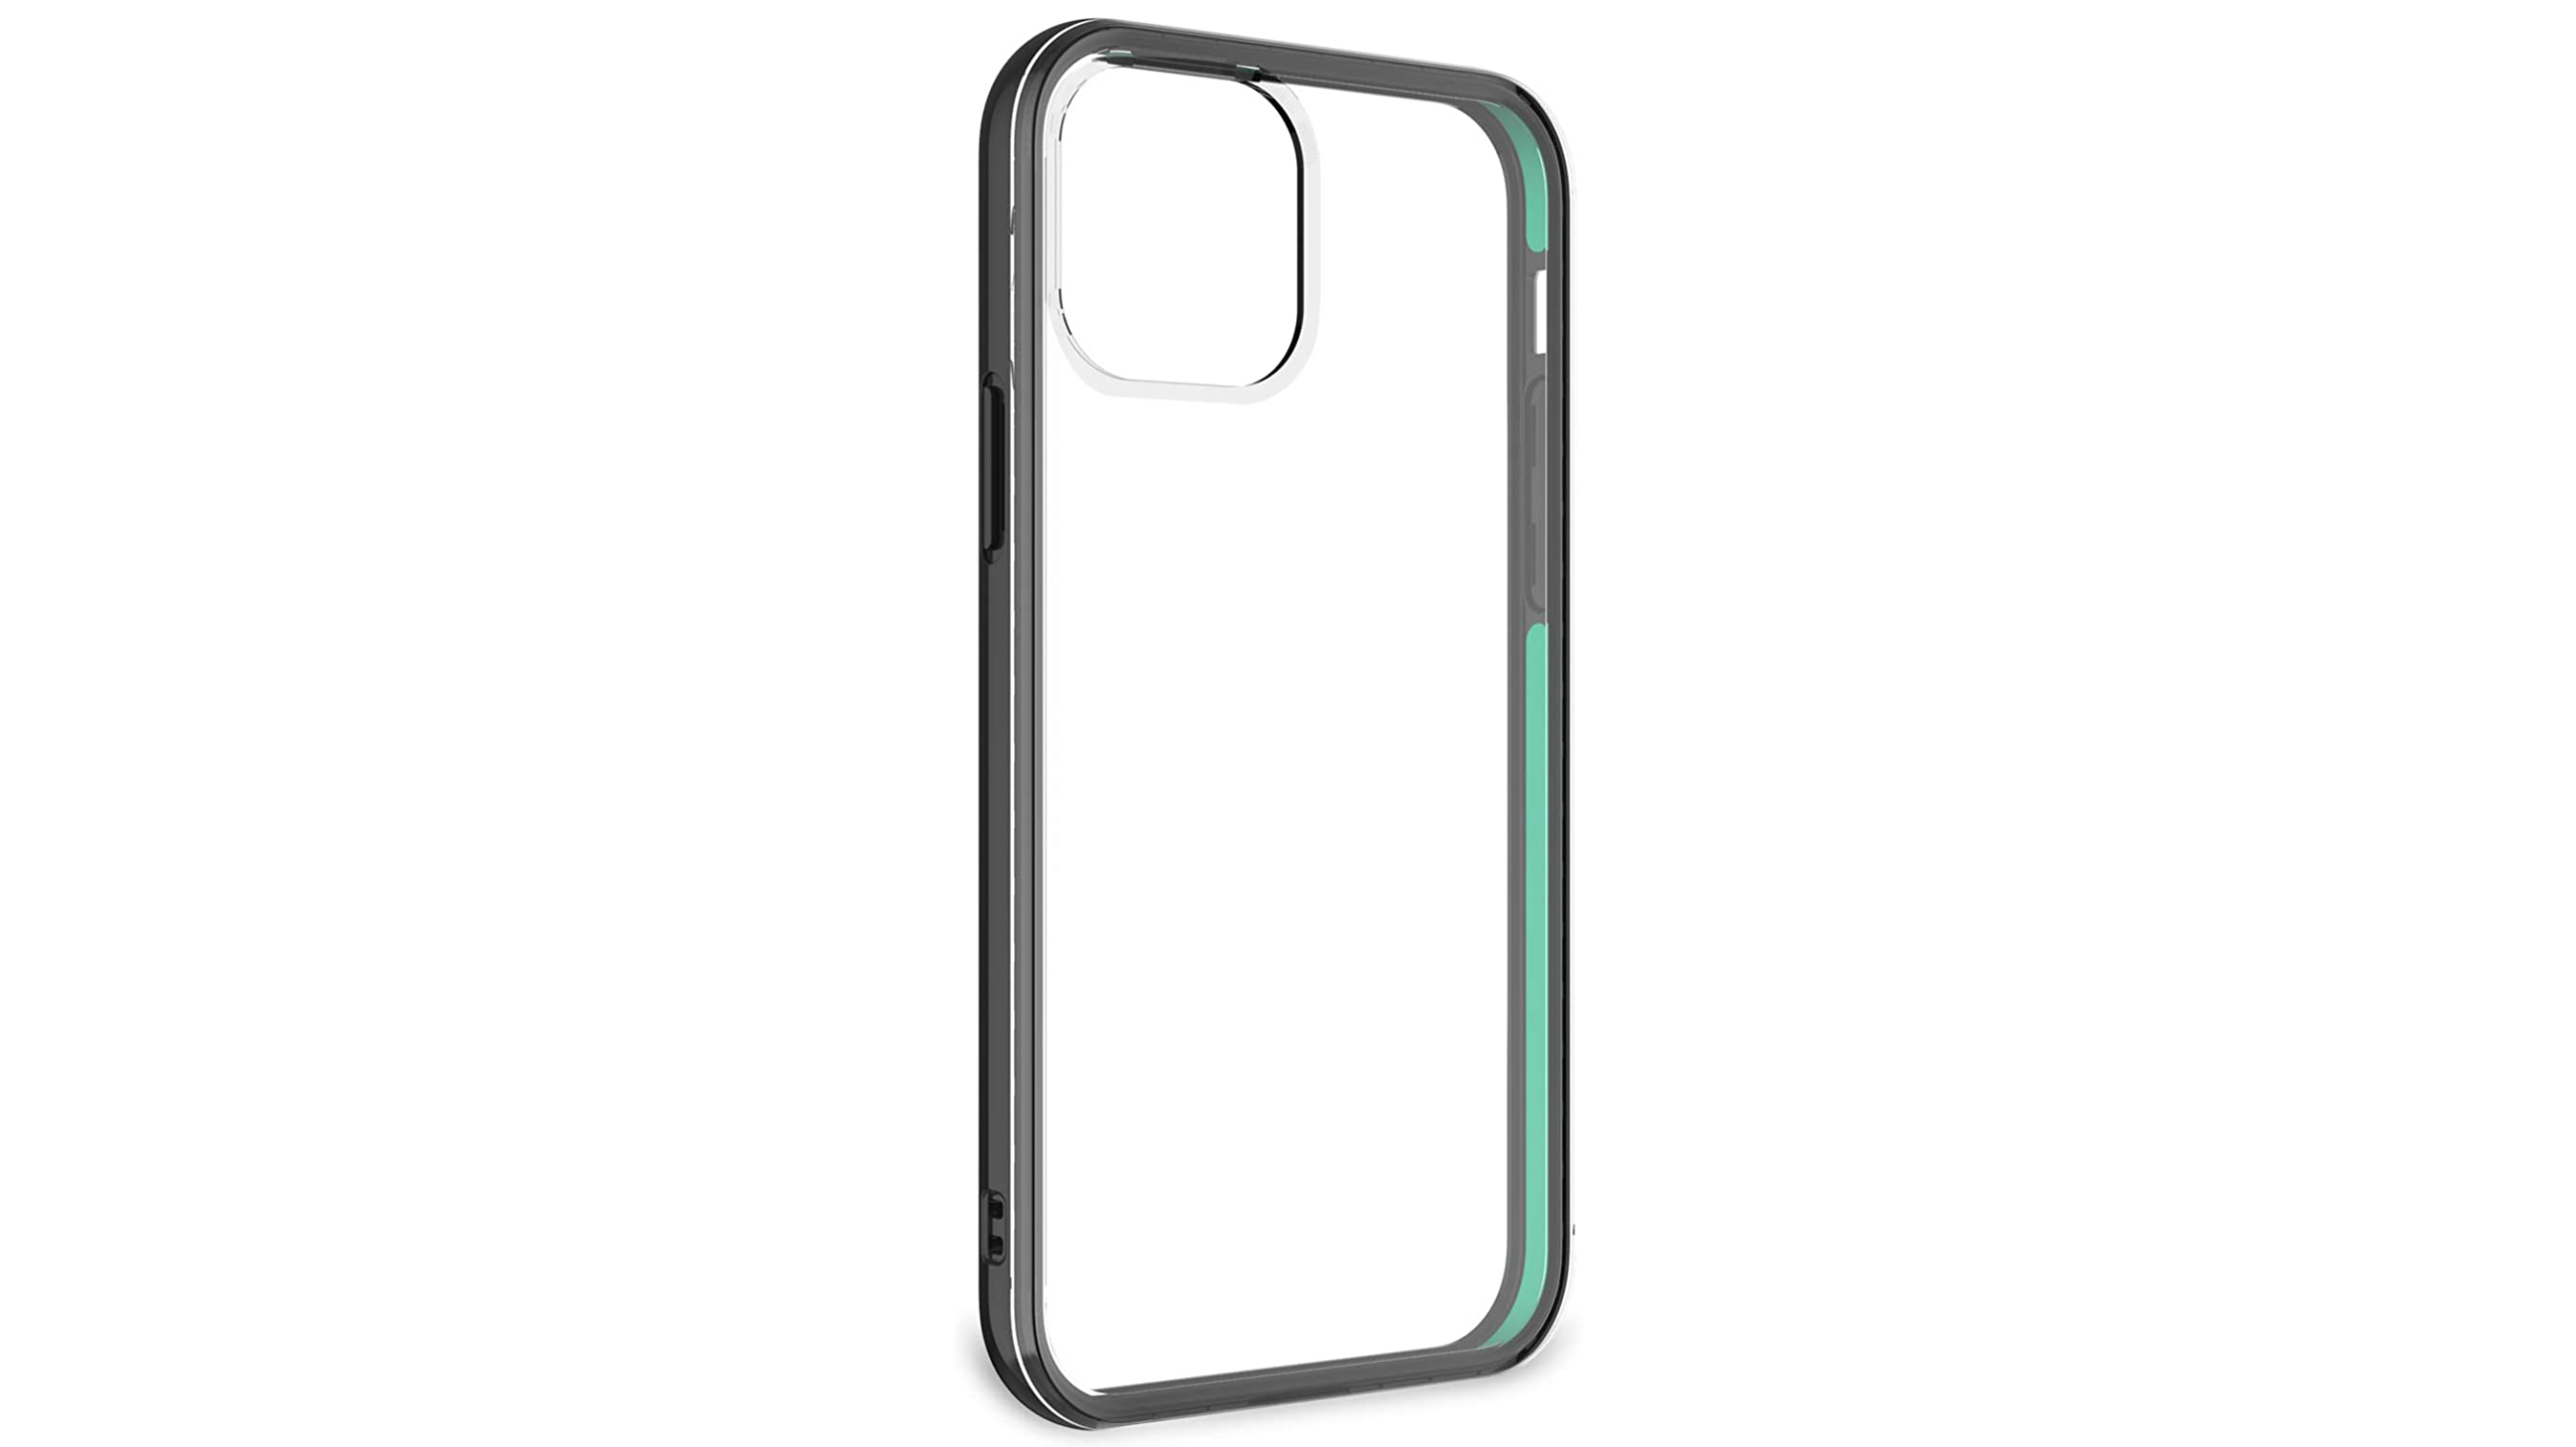 Mous Clarity iPhone 12 Pro Max Case